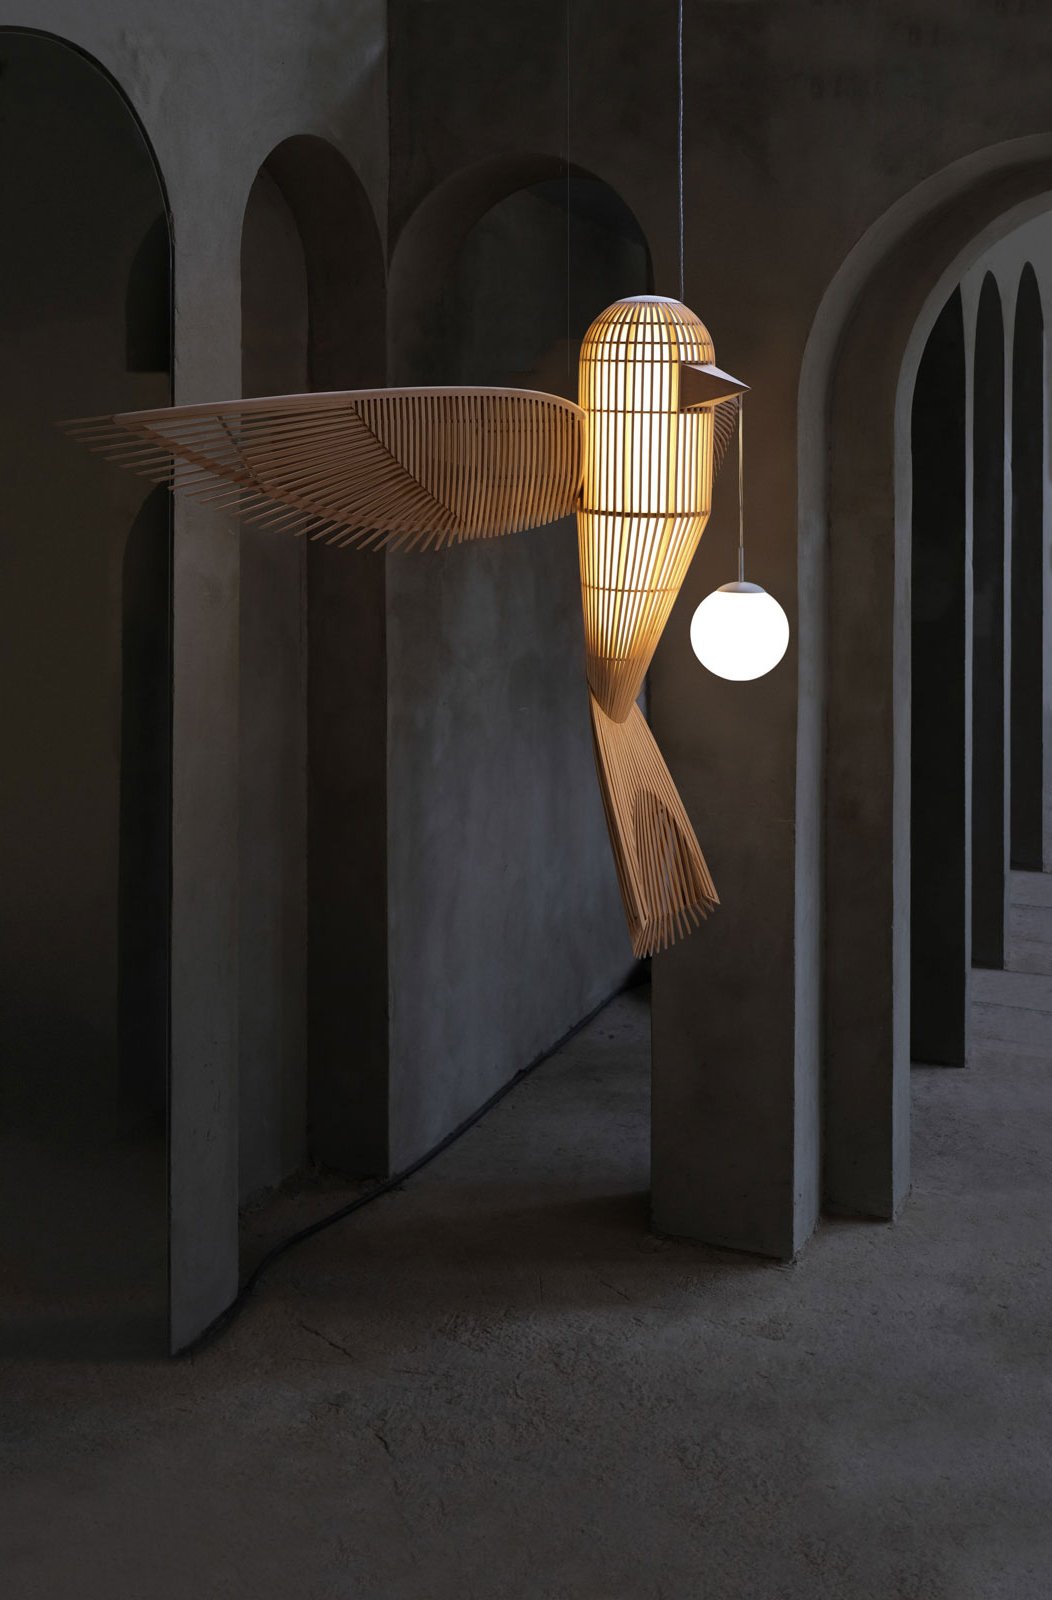 Big Bird-lamp-by-LZF-in-vertical-format-illuminating-an-architectural-space